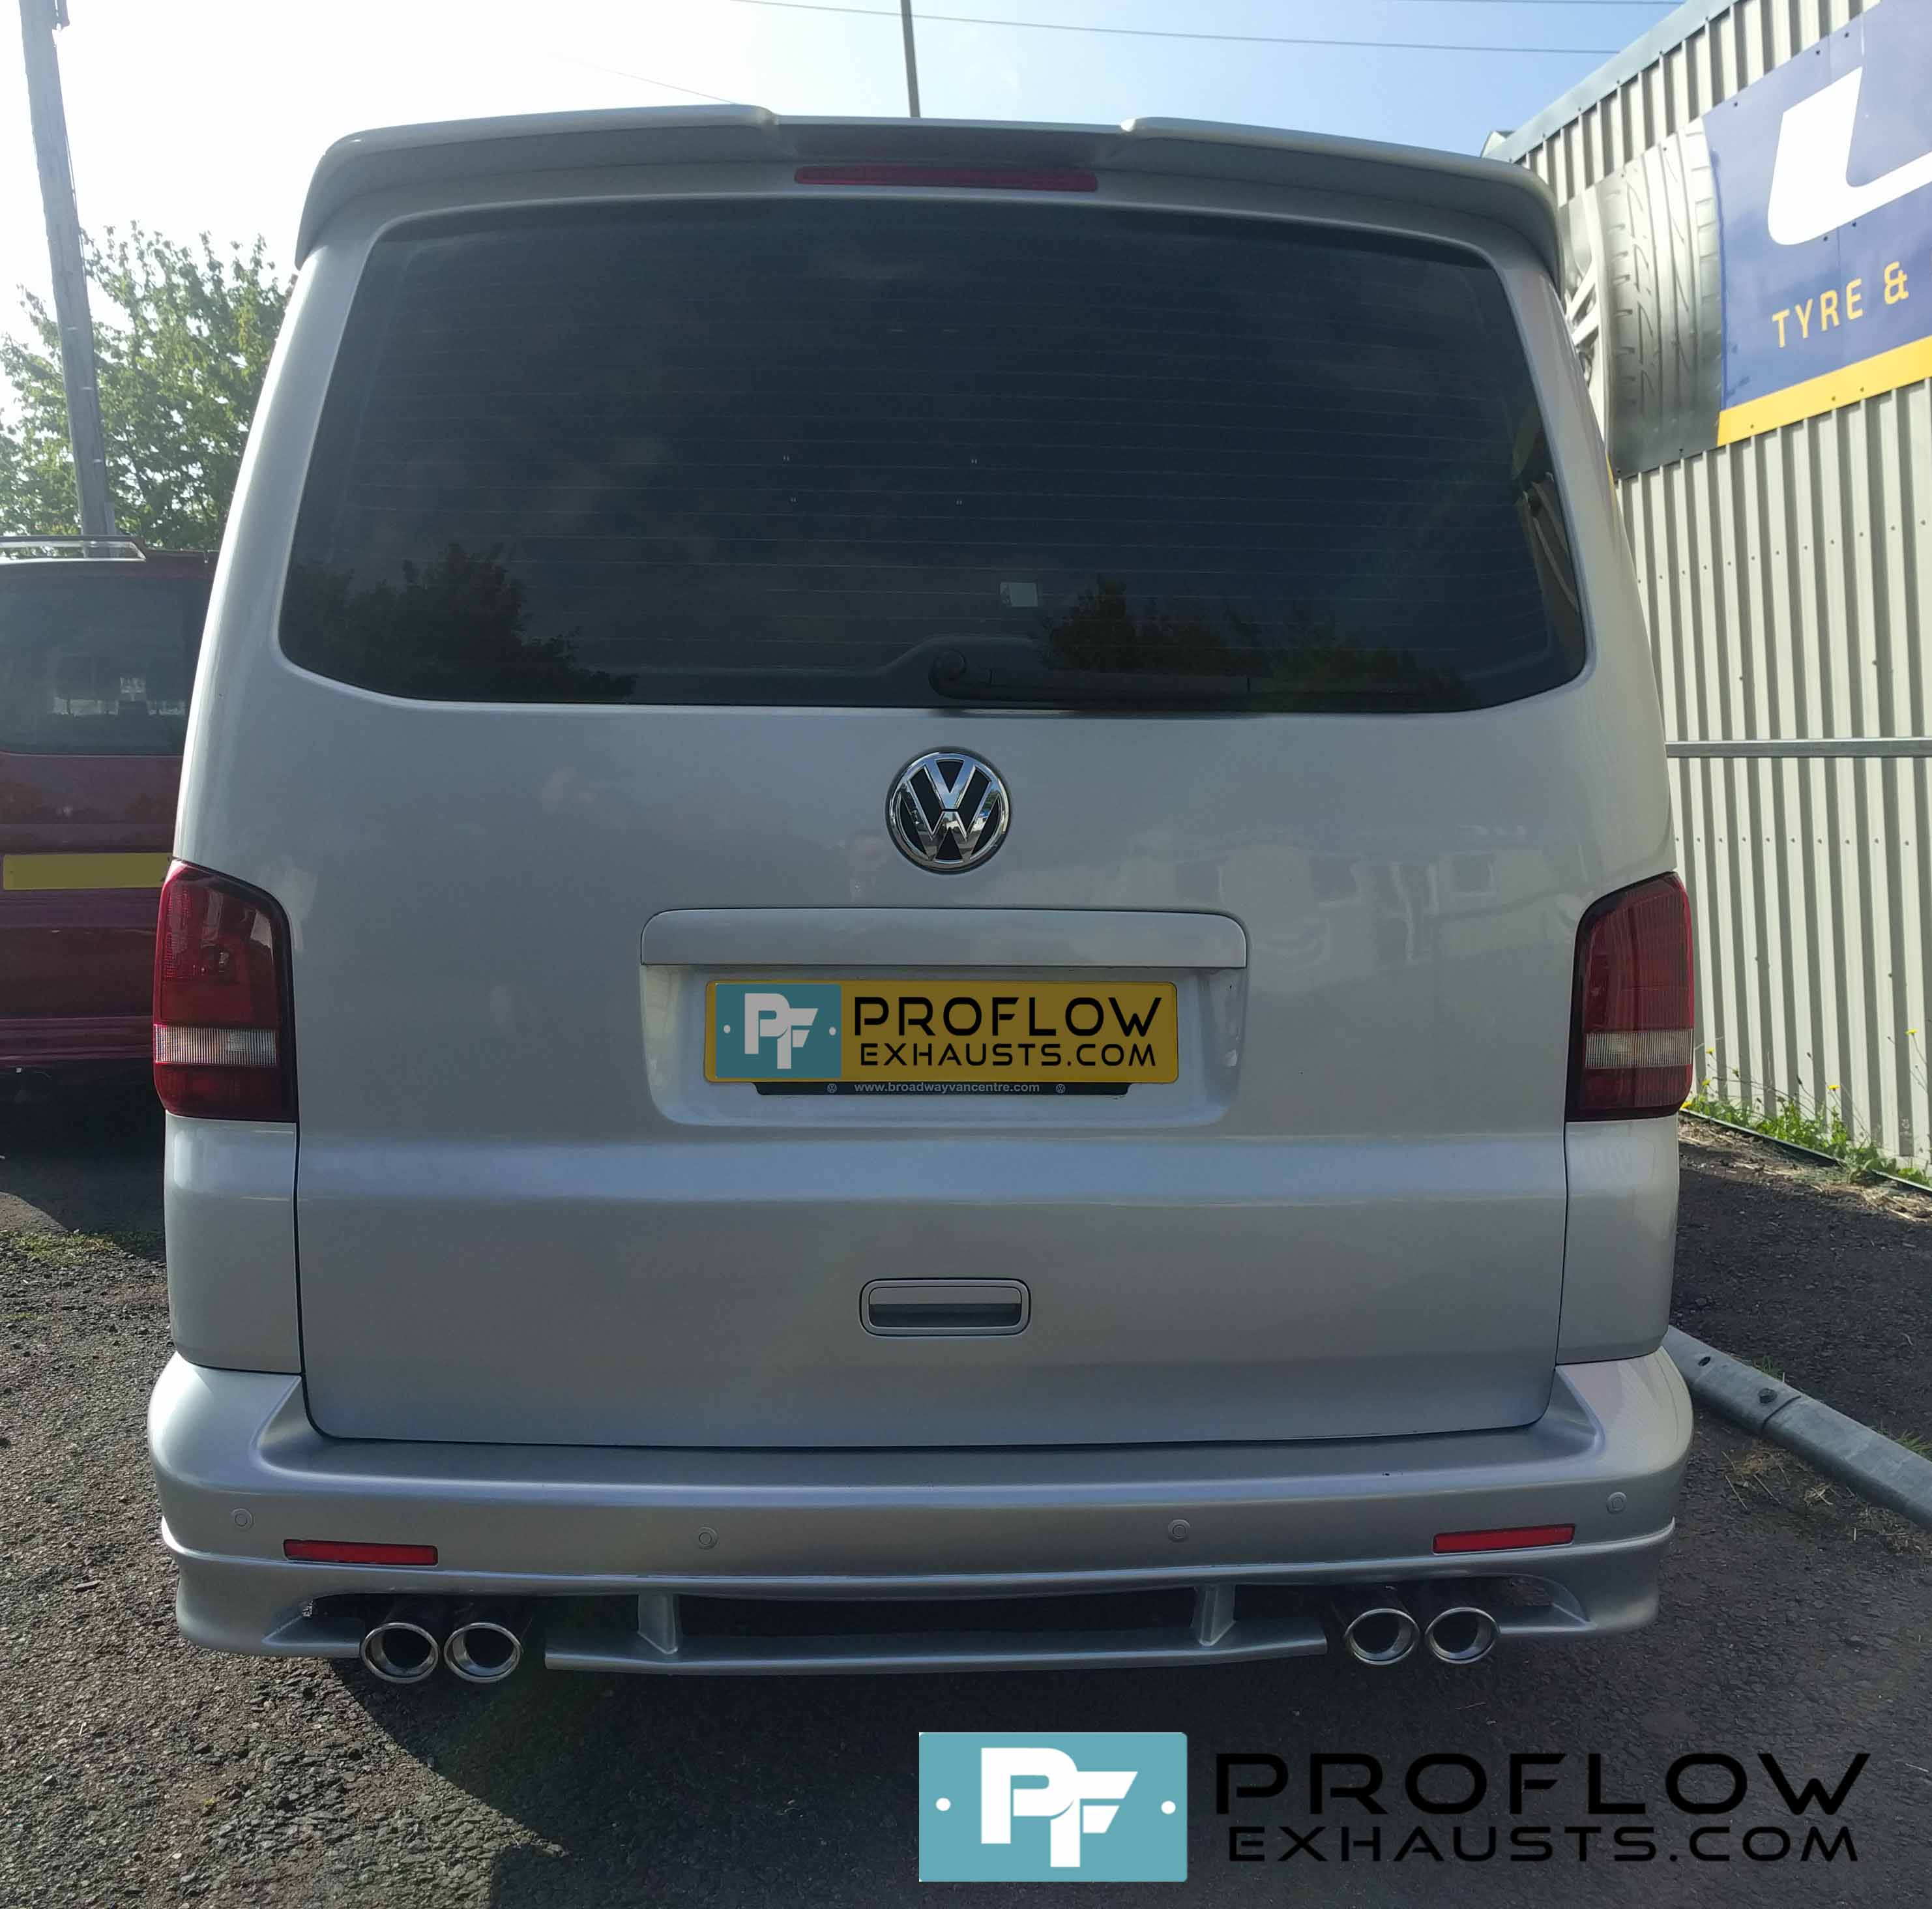 VW T5 Silver Transporter fitted with a Proflow Stainless Steel Exhaust